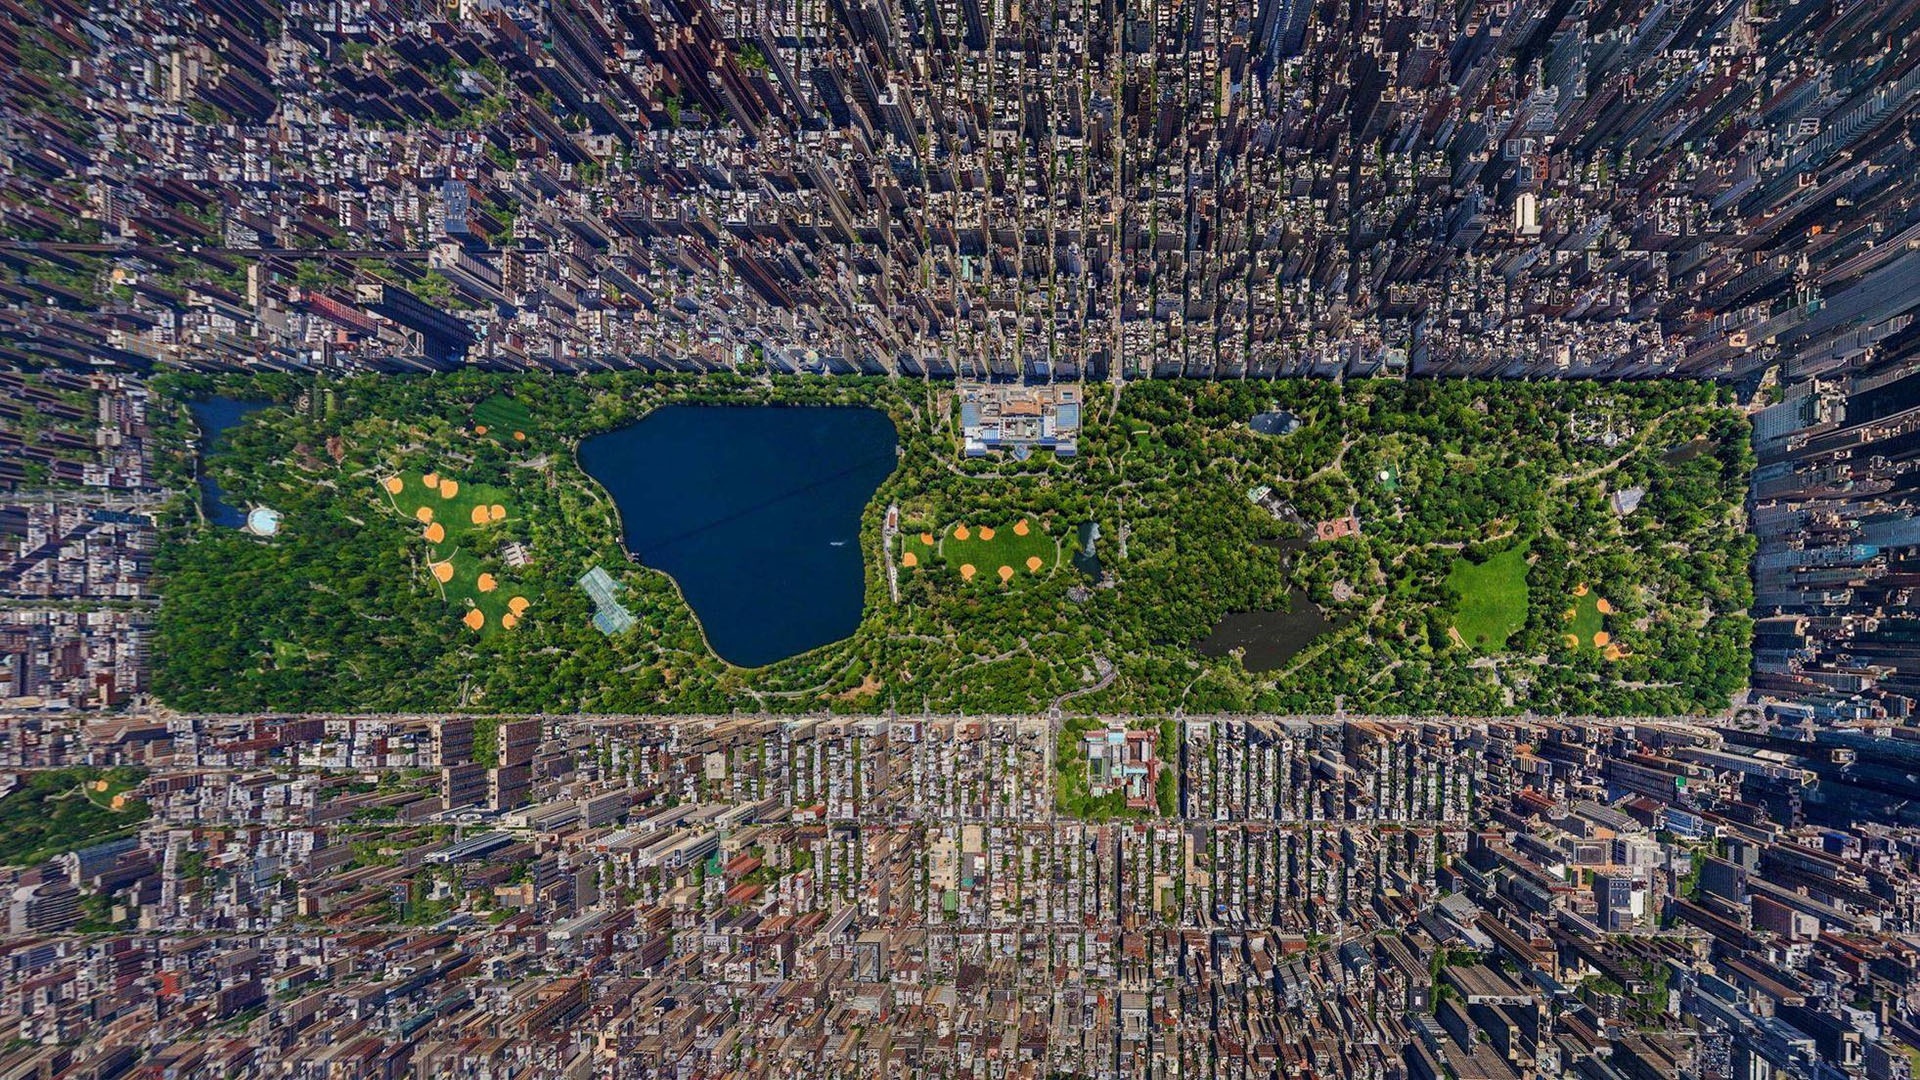 Central Park: A must-see for any traveler to the New York City area, Metropolis. 1920x1080 Full HD Wallpaper.